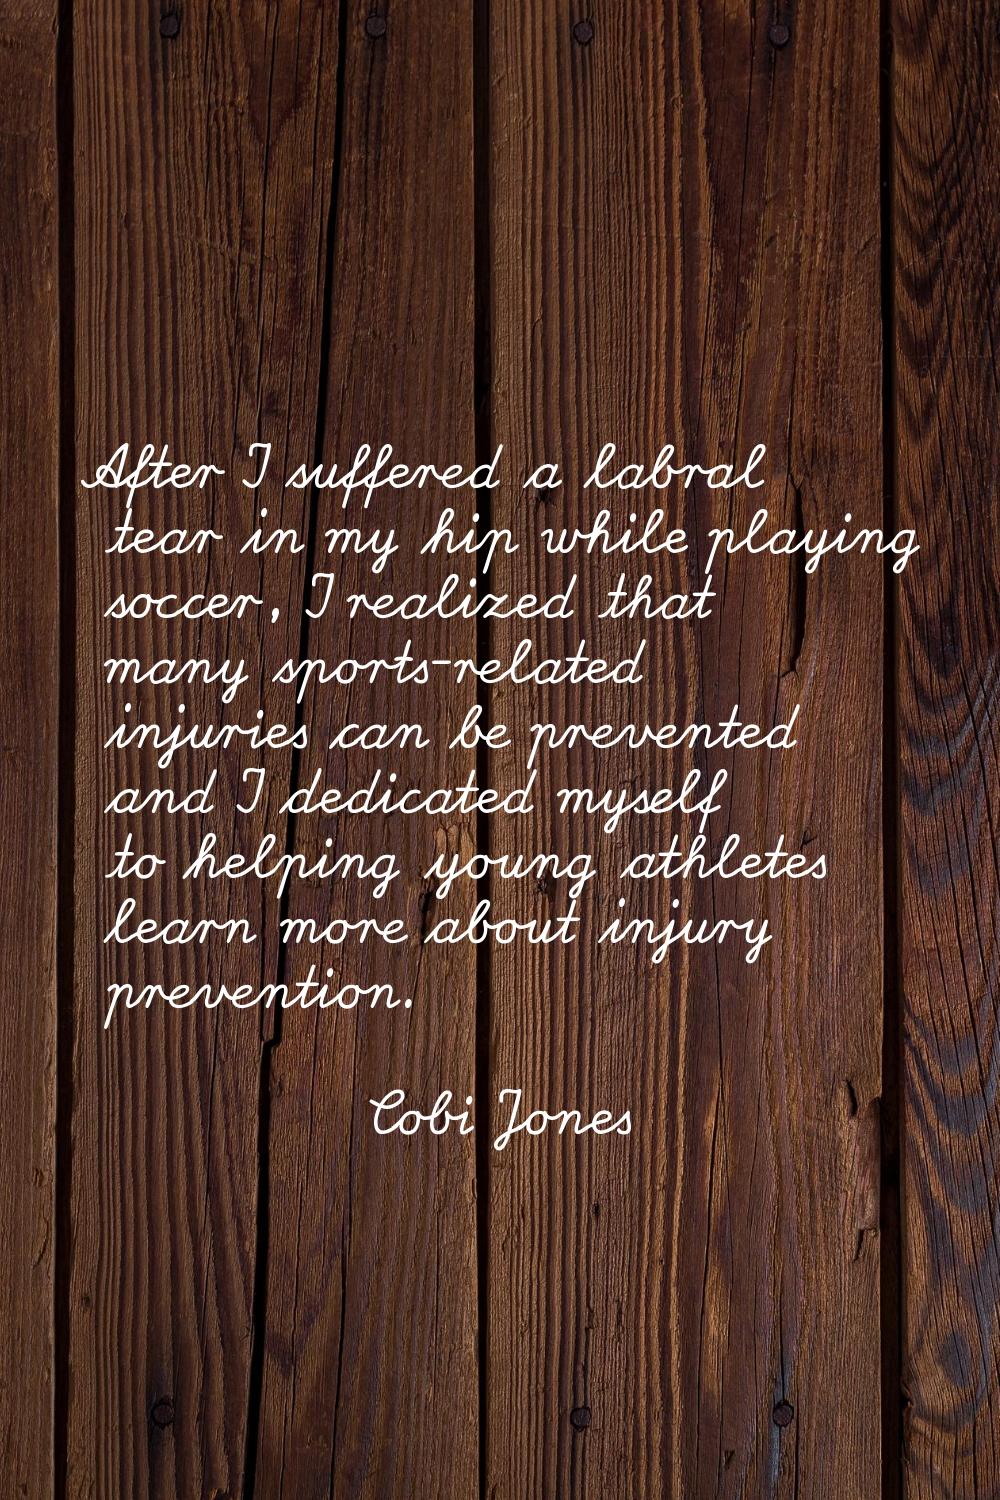 After I suffered a labral tear in my hip while playing soccer, I realized that many sports-related 